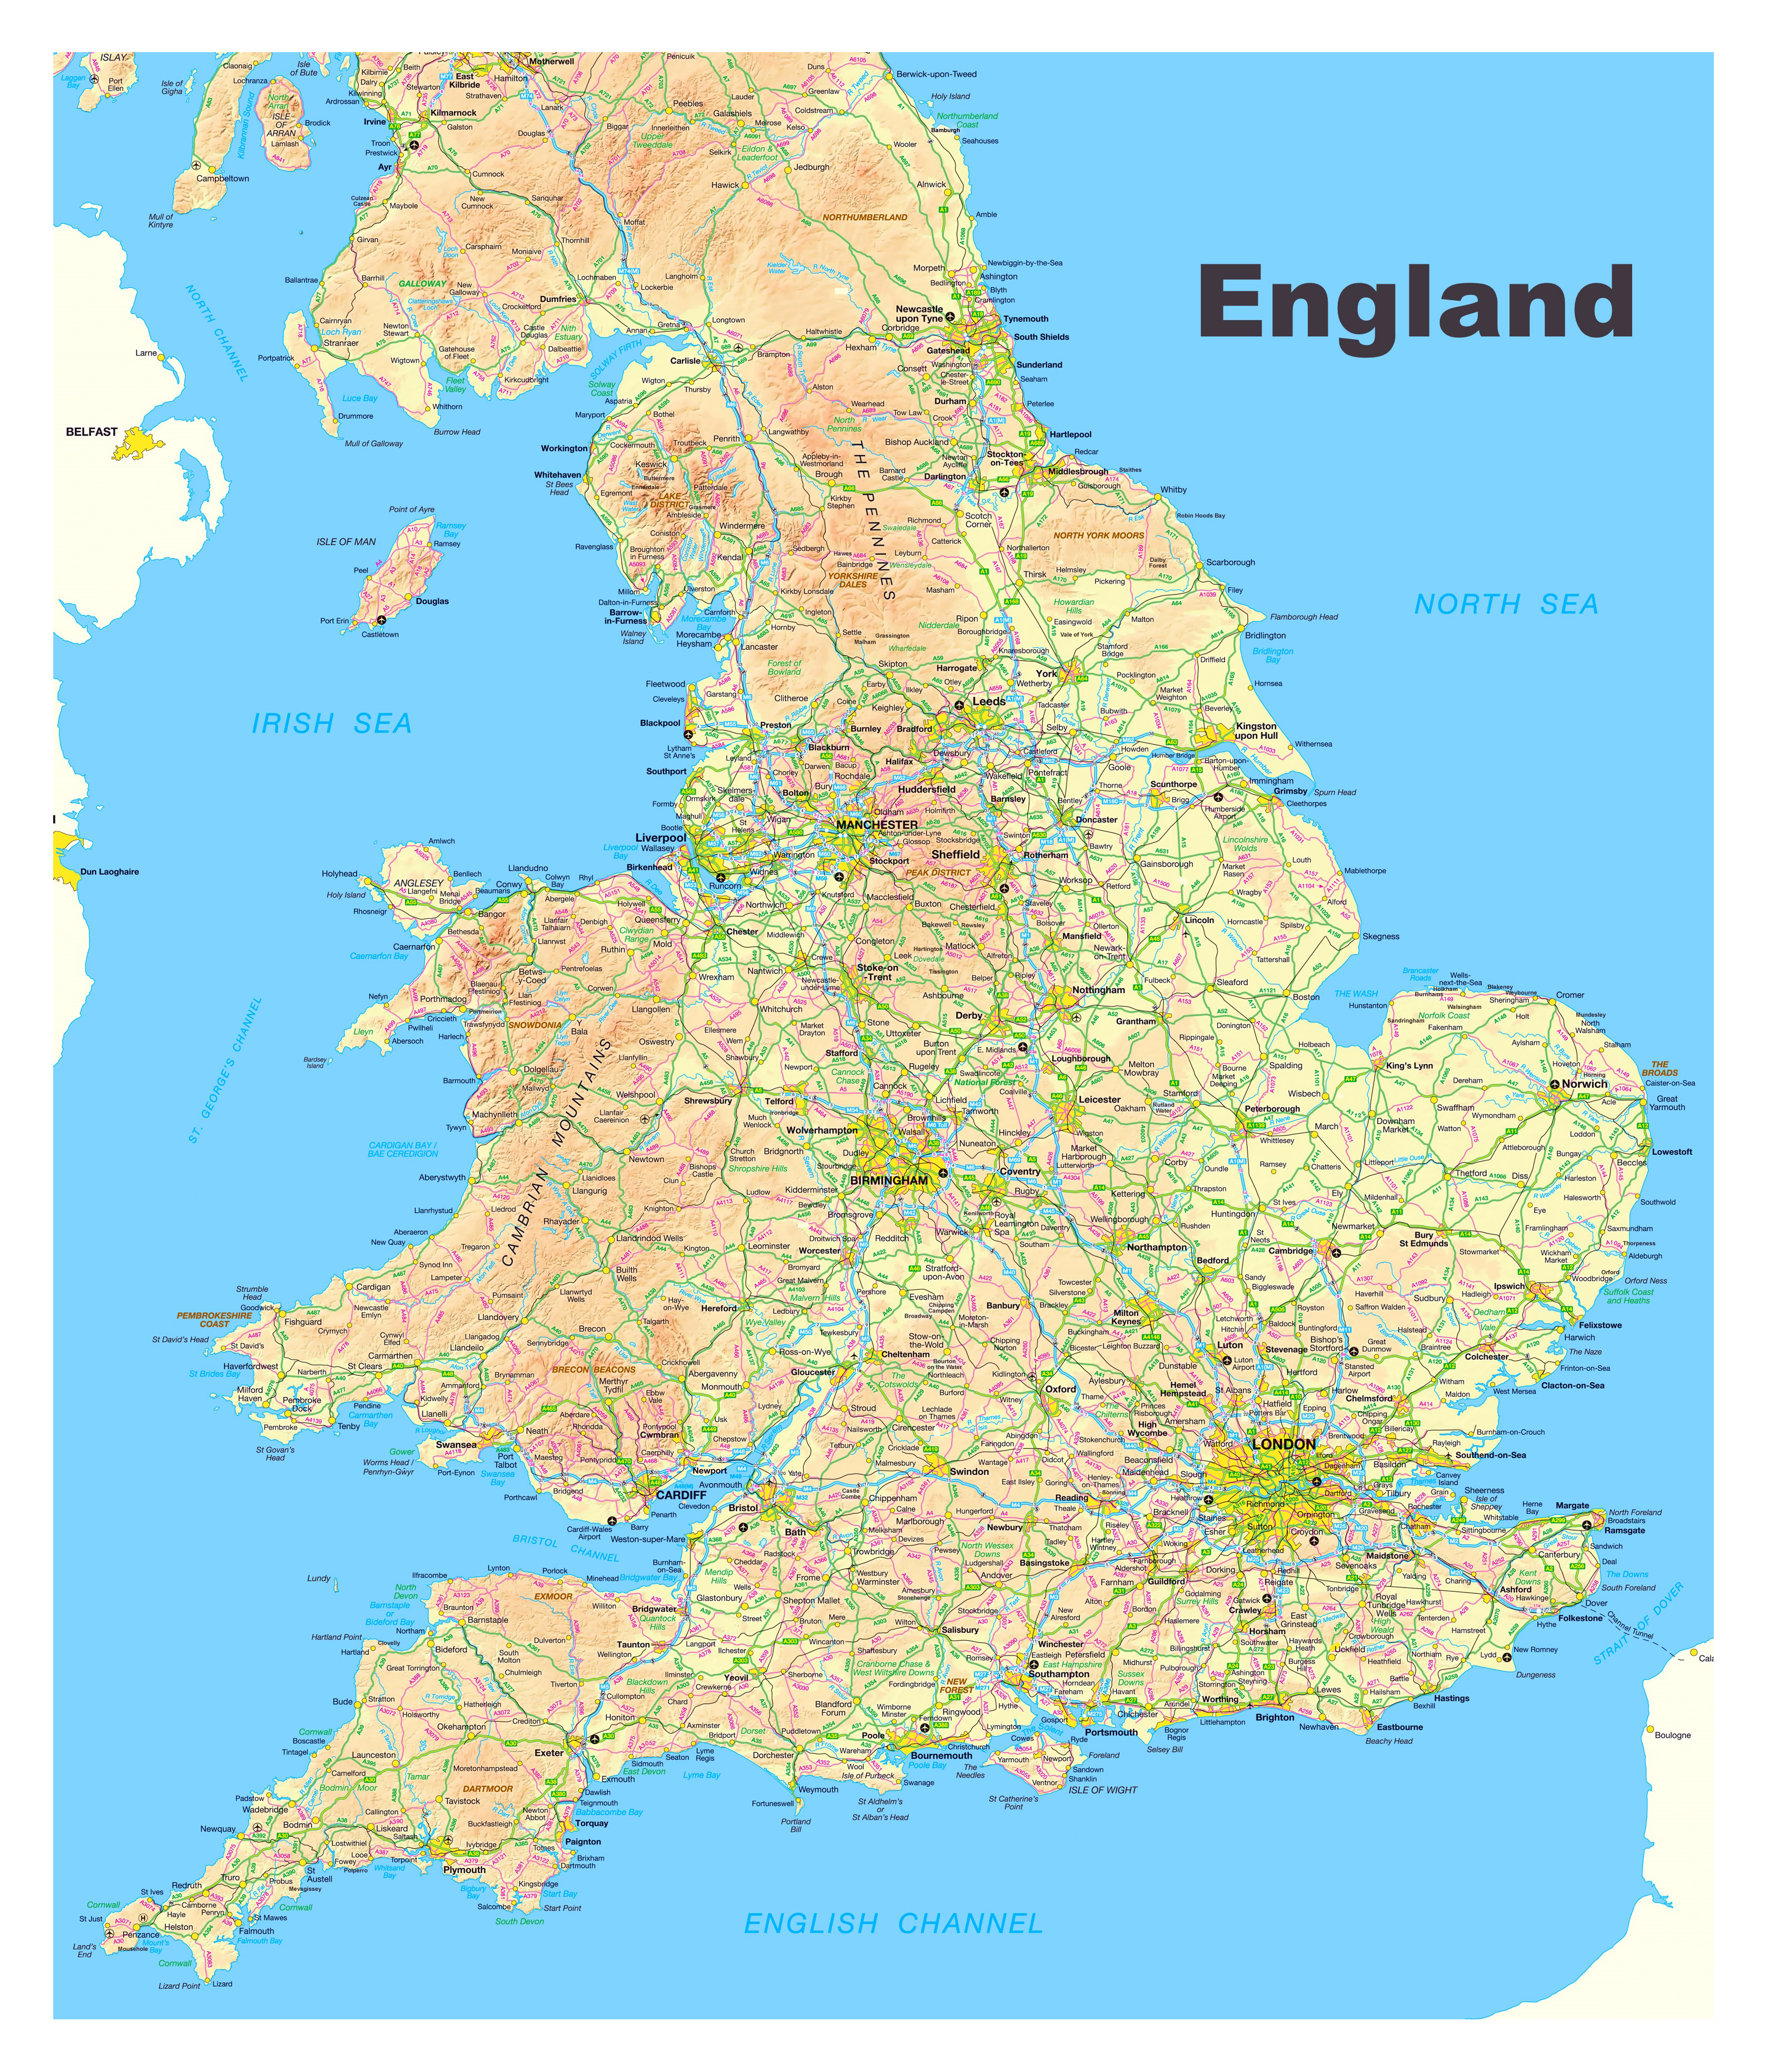 Large Map Of England With Roads Cities And Other Marks England